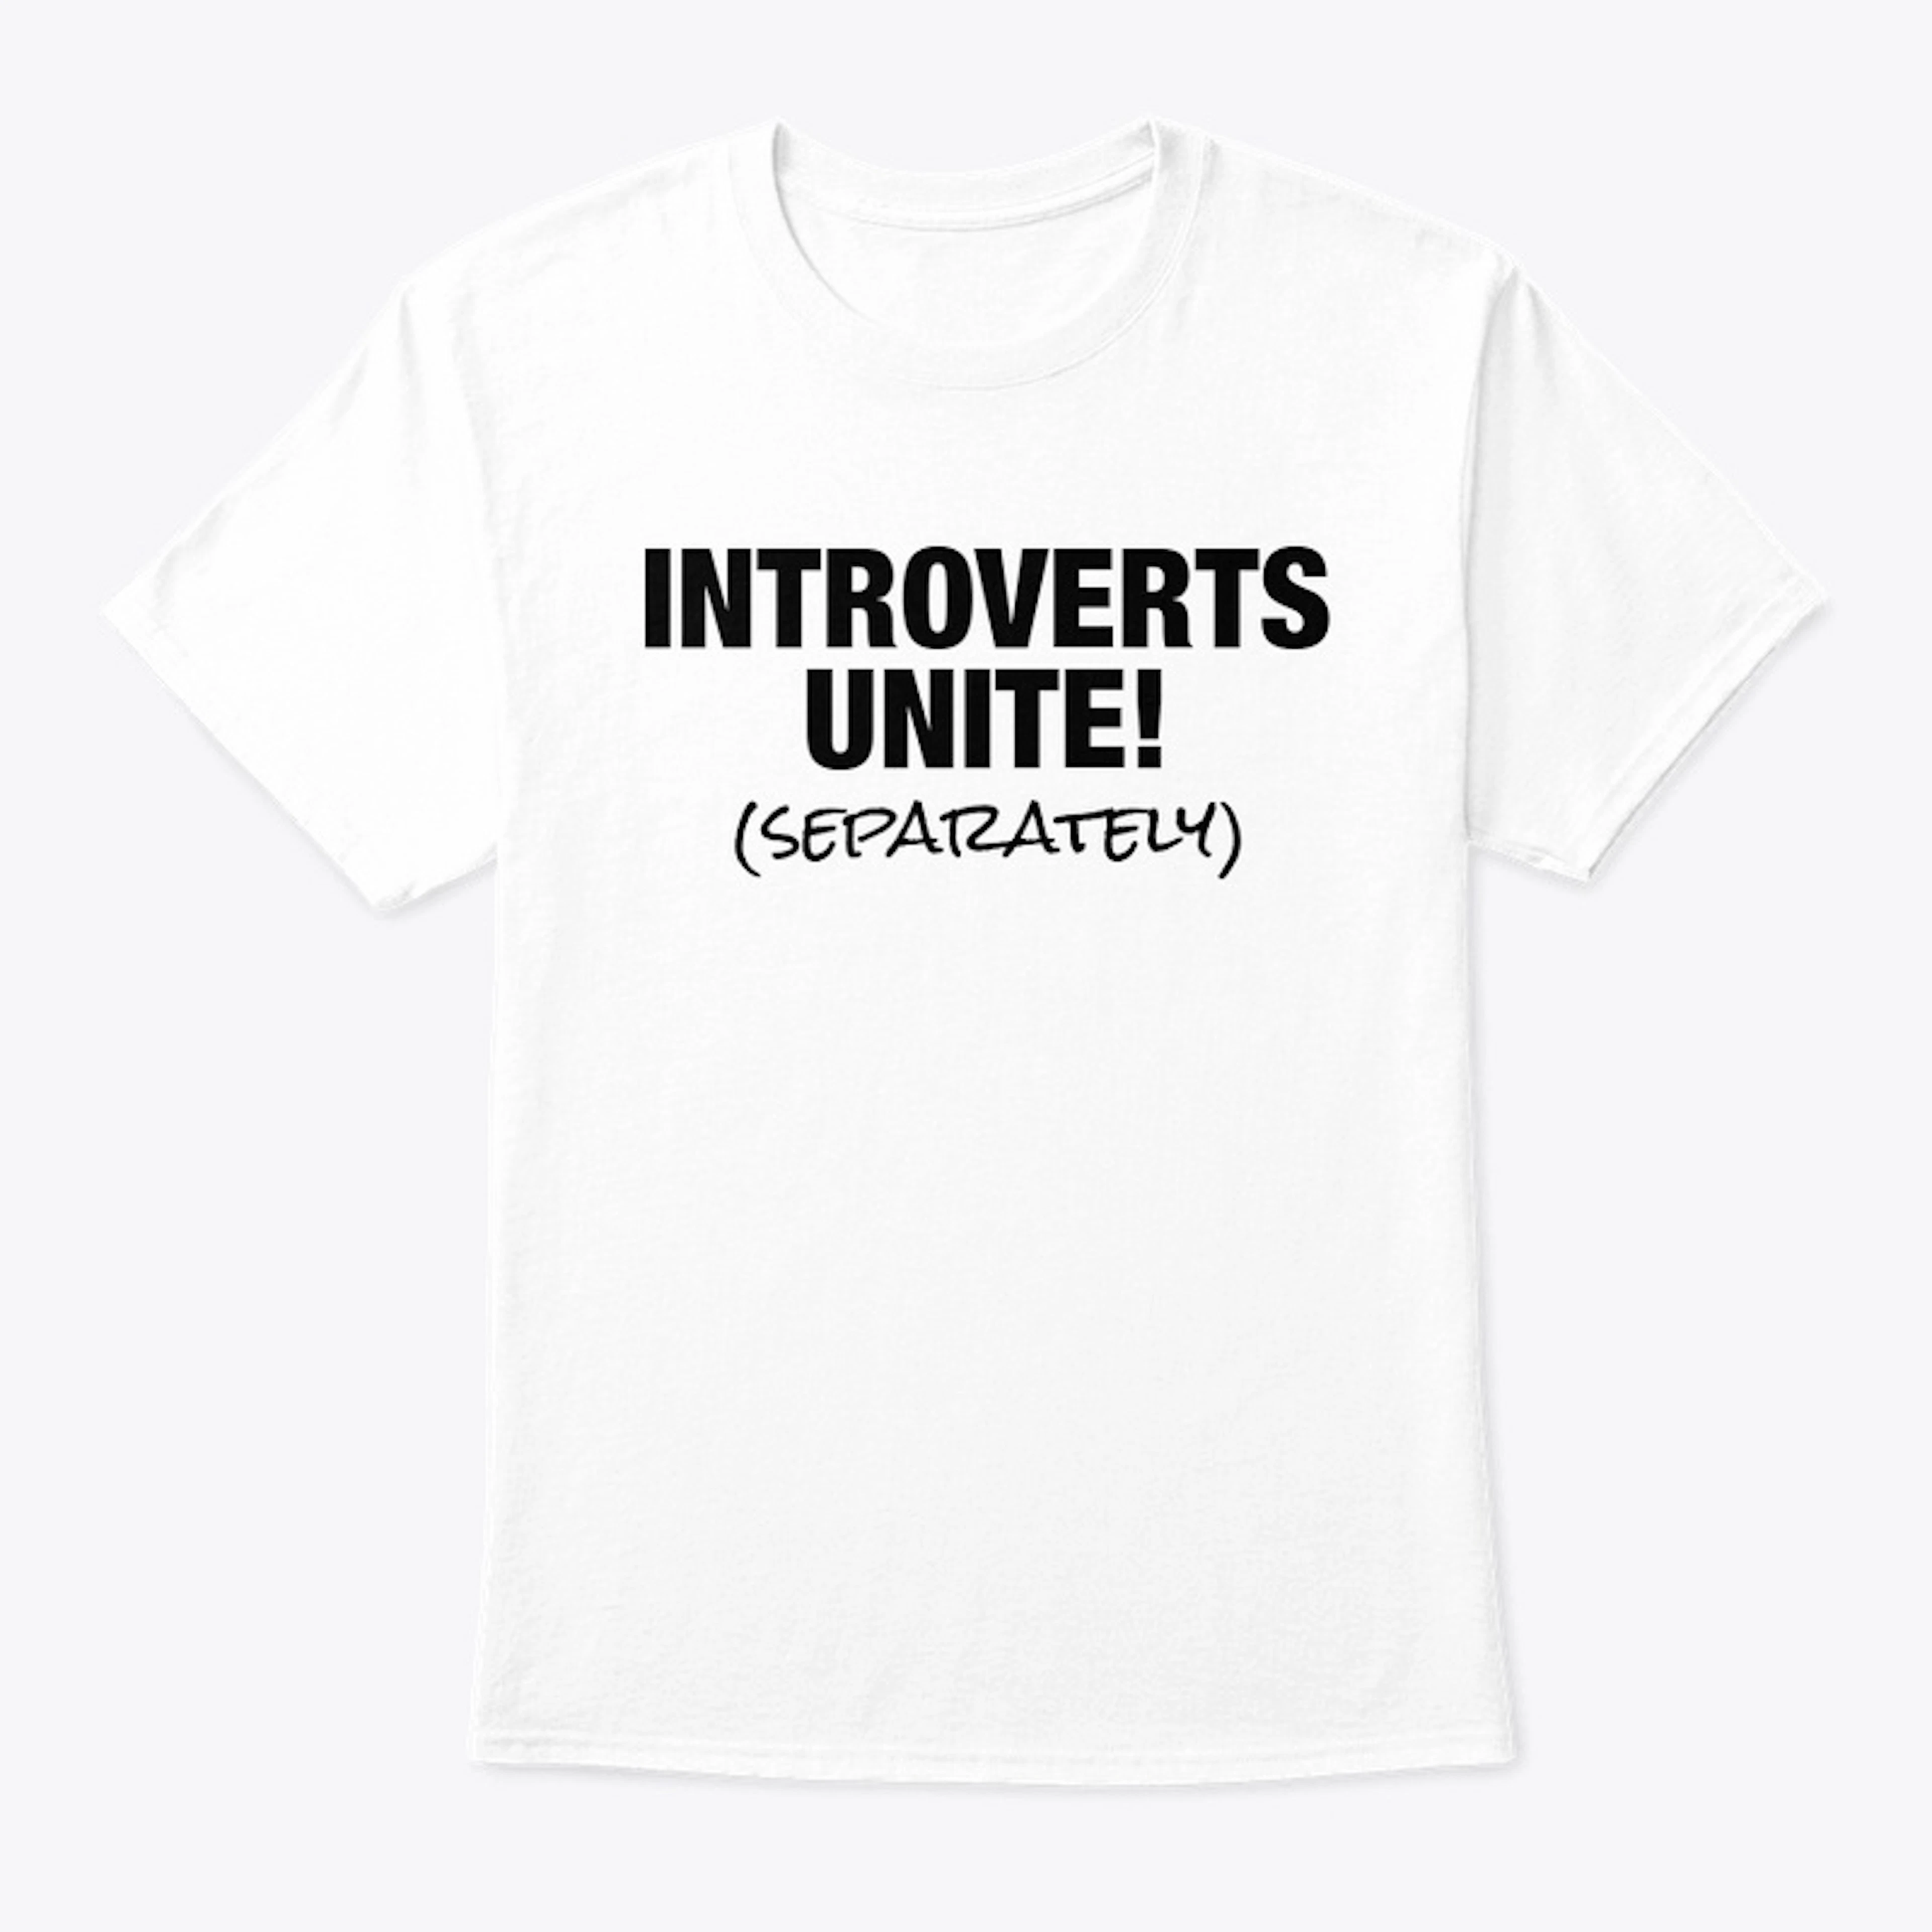 "The Introvert Club"